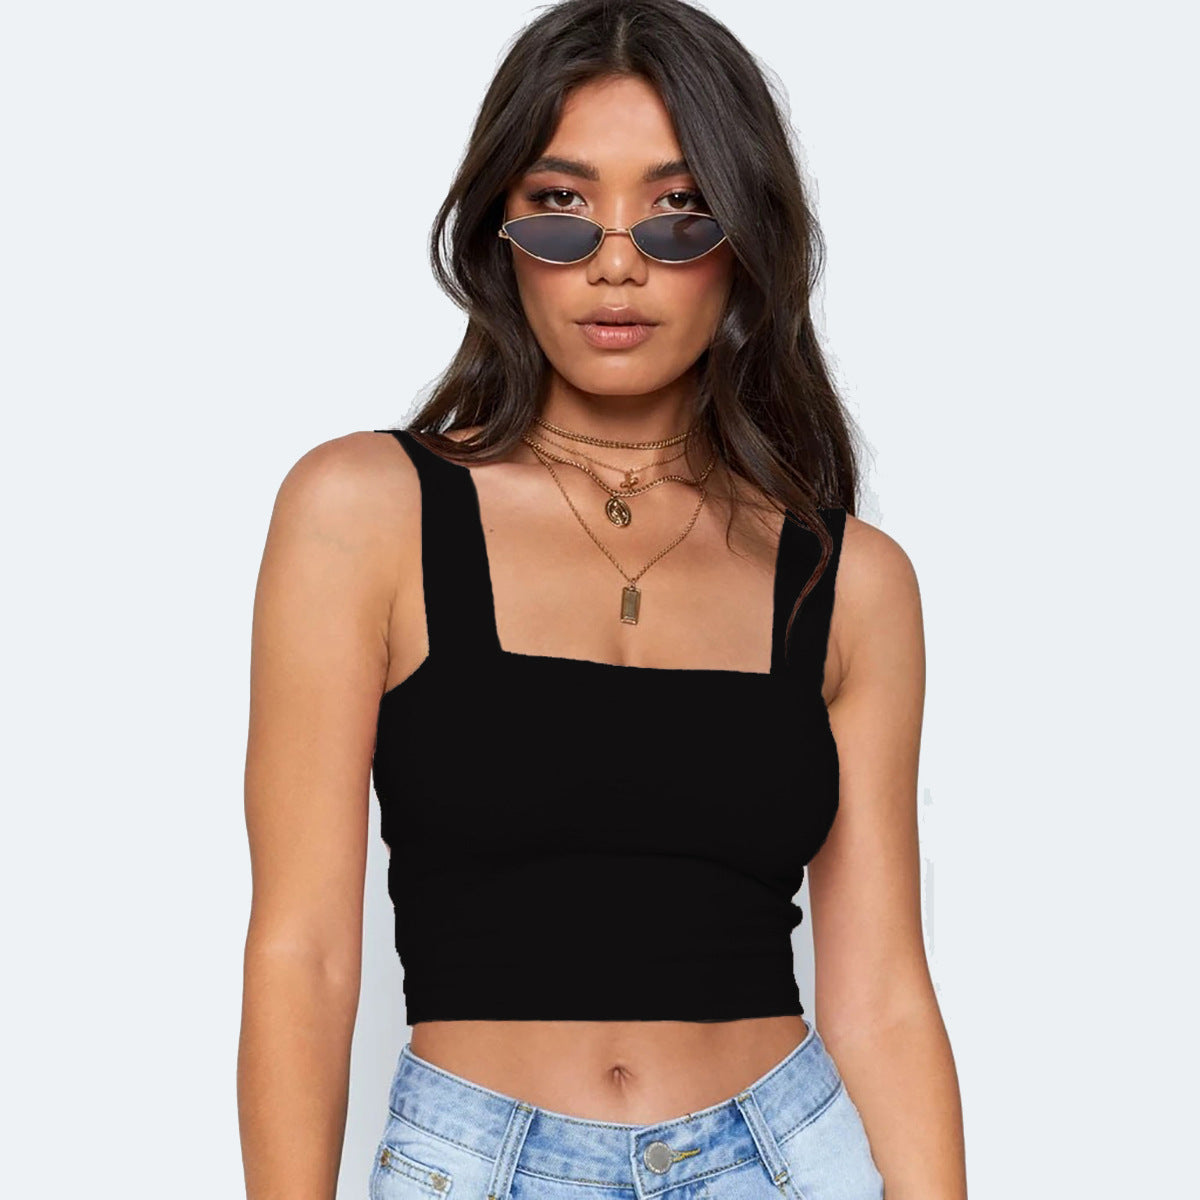 2023 Fashion Trends Forecast | Back to Basics Crop Top